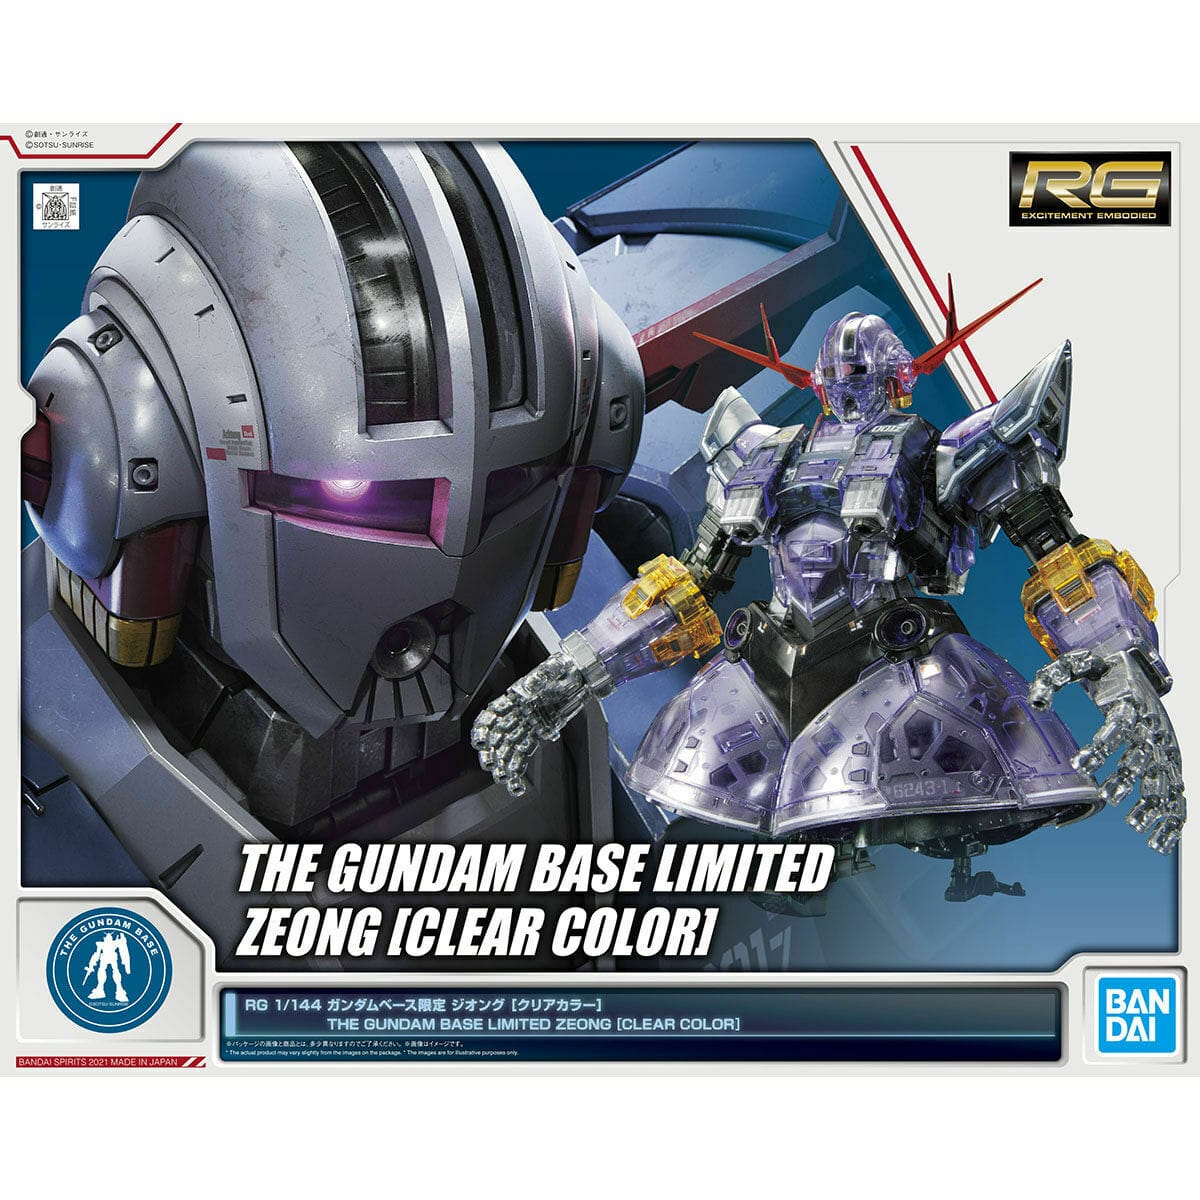 RG 1/144 THE GUNDAM BASE LIMITED ZEONG [CLEAR COLOR]